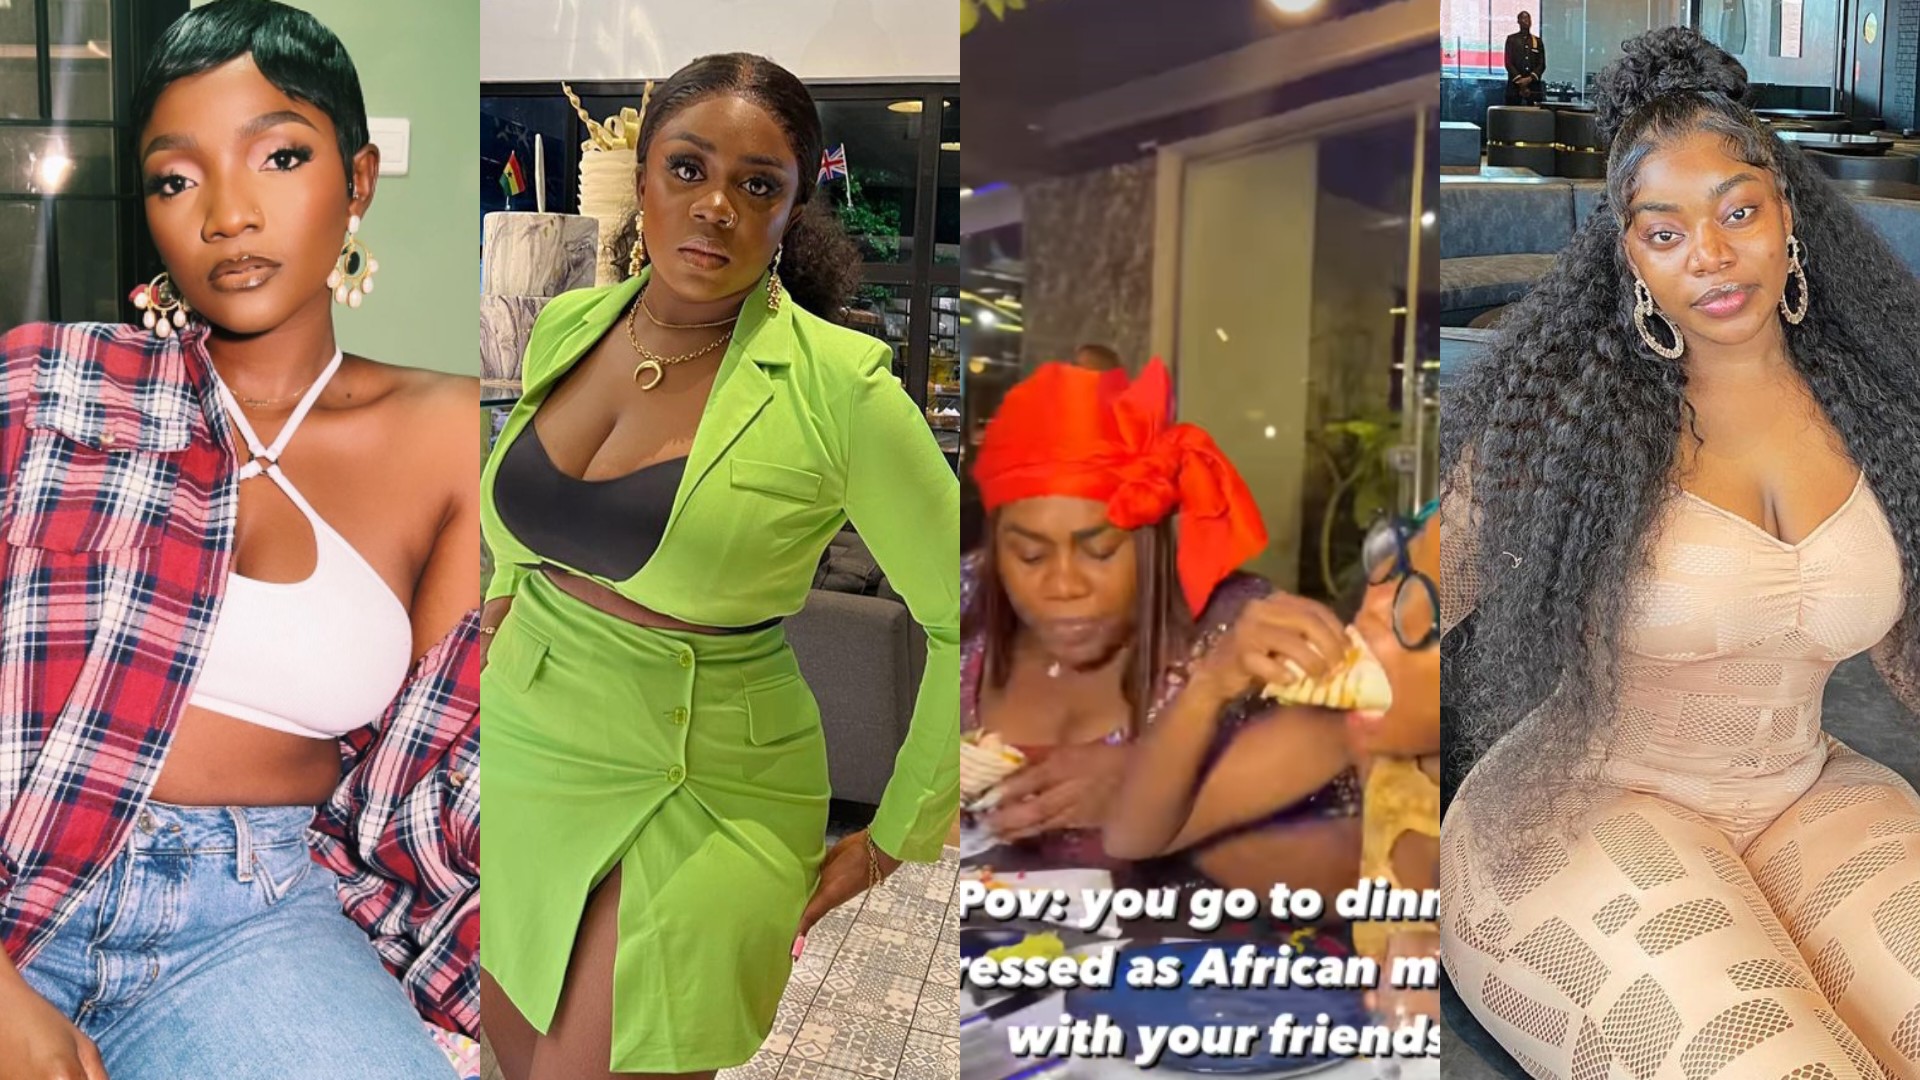 Singer Simi attacks Skitmakers Nons Miraj, Ashmusy over video depicting African mothers